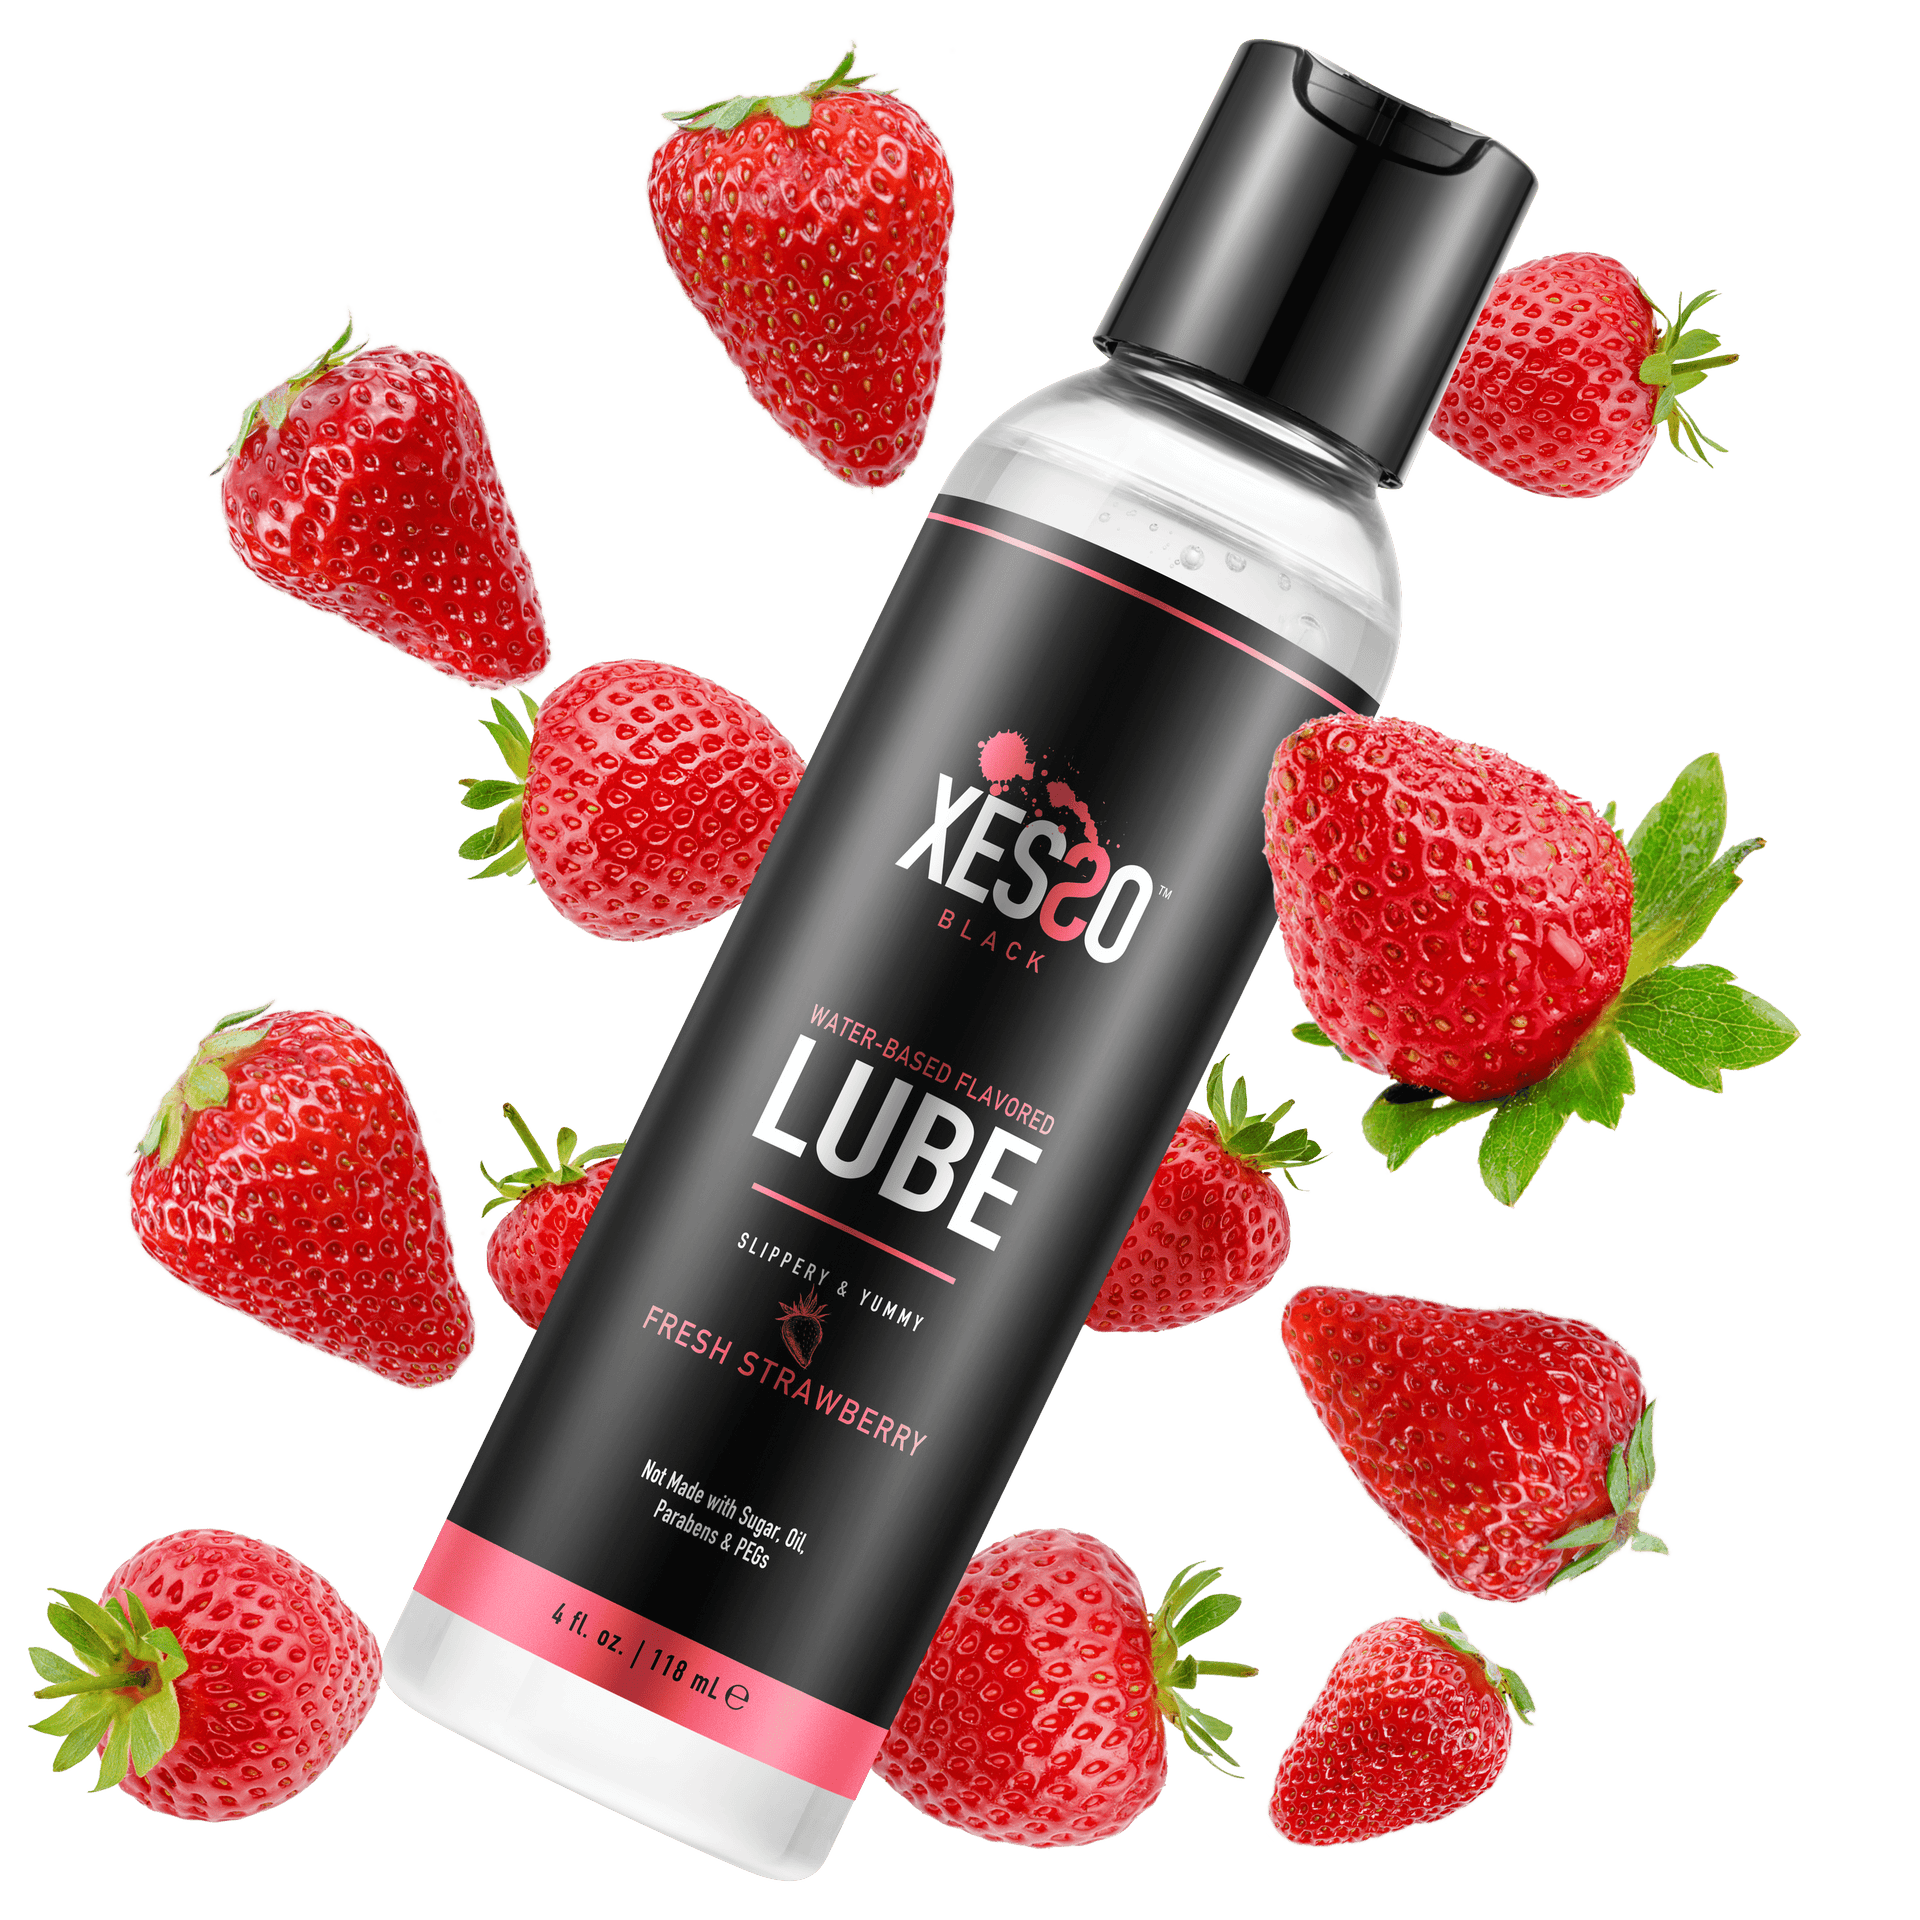 Lube Life Water-Based Strawberry Flavored Lubricant, Personal Lube for Men, Women and Couples, Made Without Added Sugar, 8 fl oz